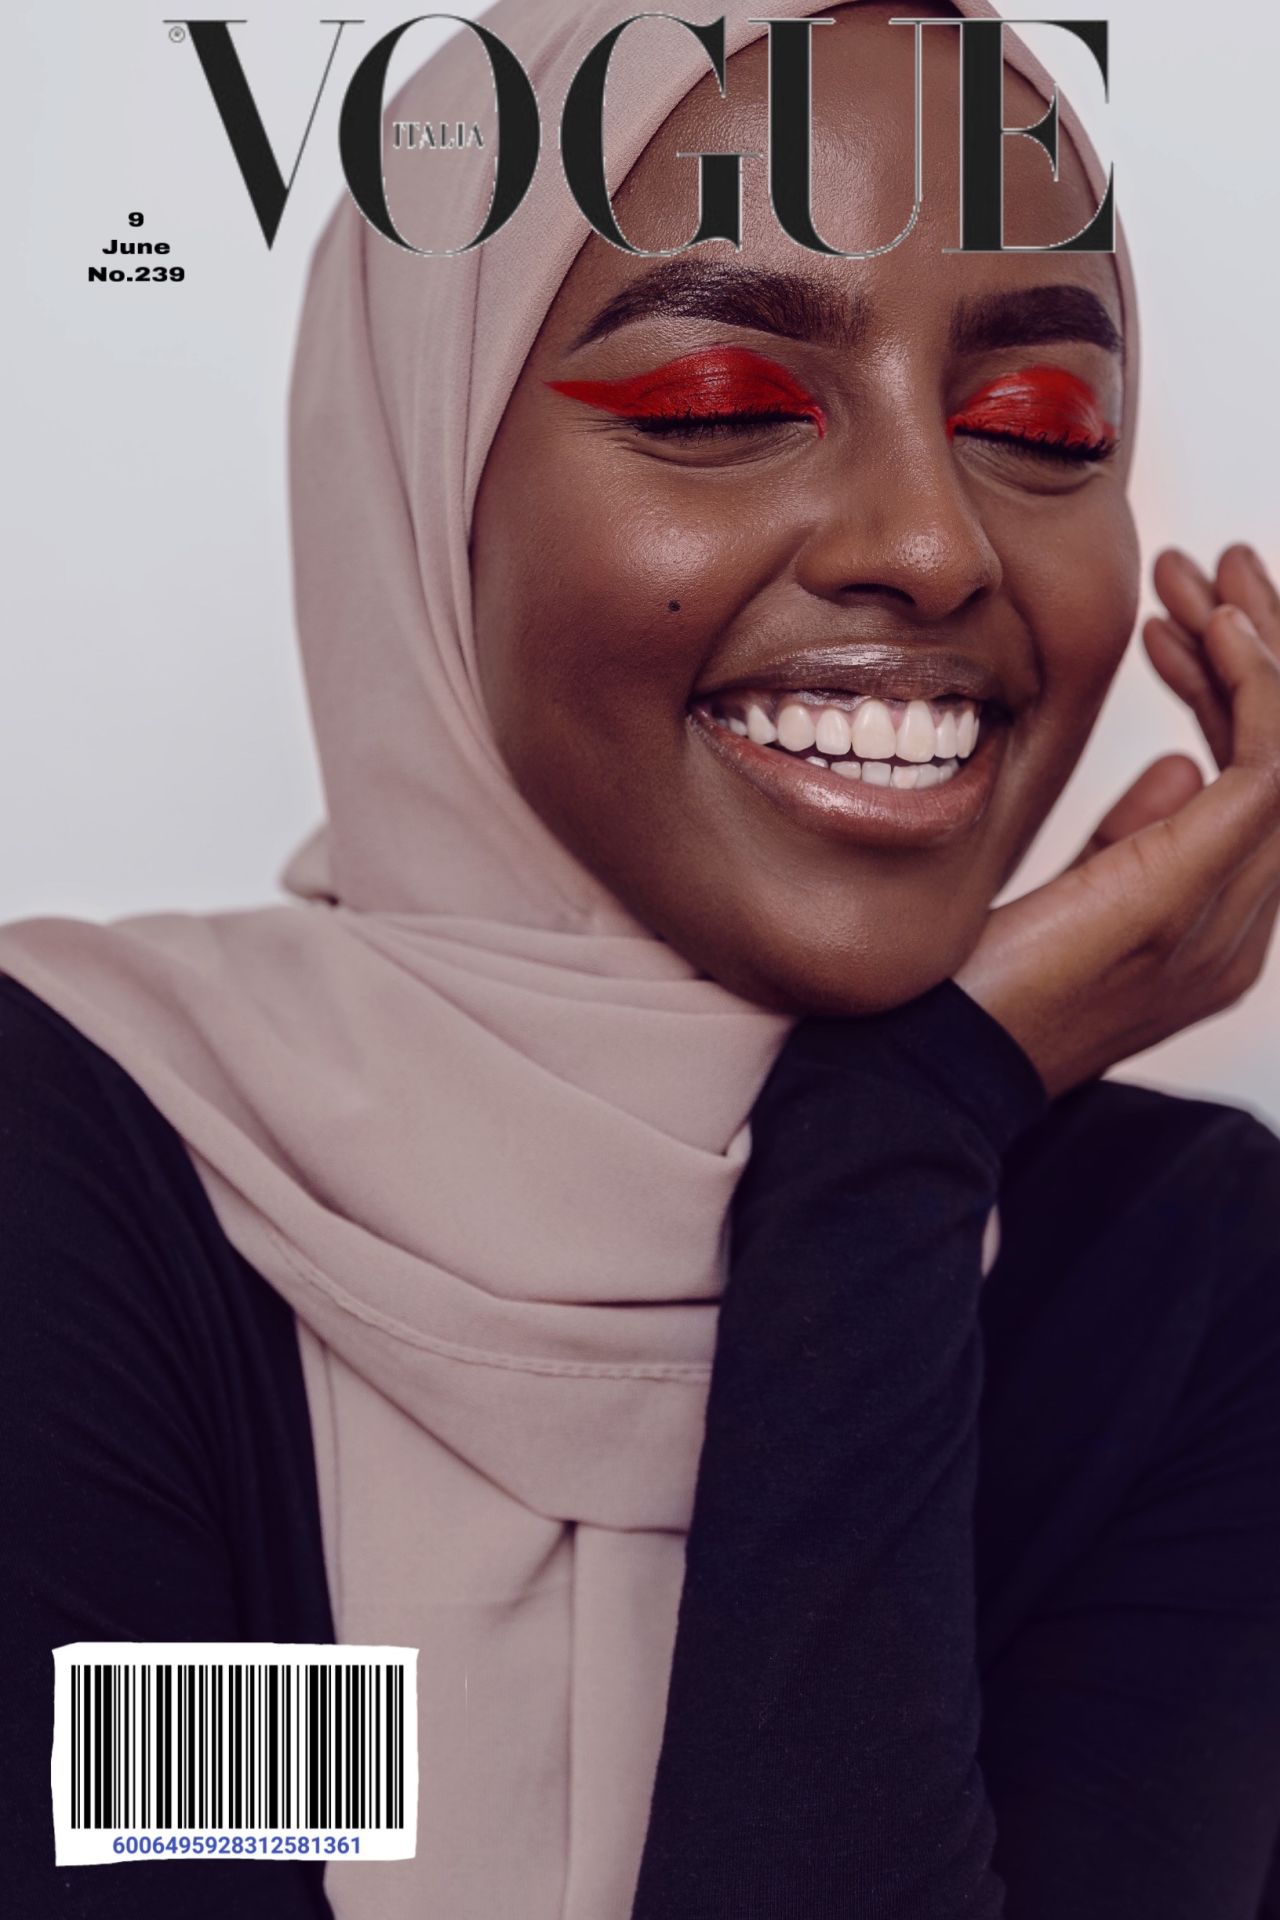 Oslo-based student Salma Noor started the Vogue Challenge which has since gone viral